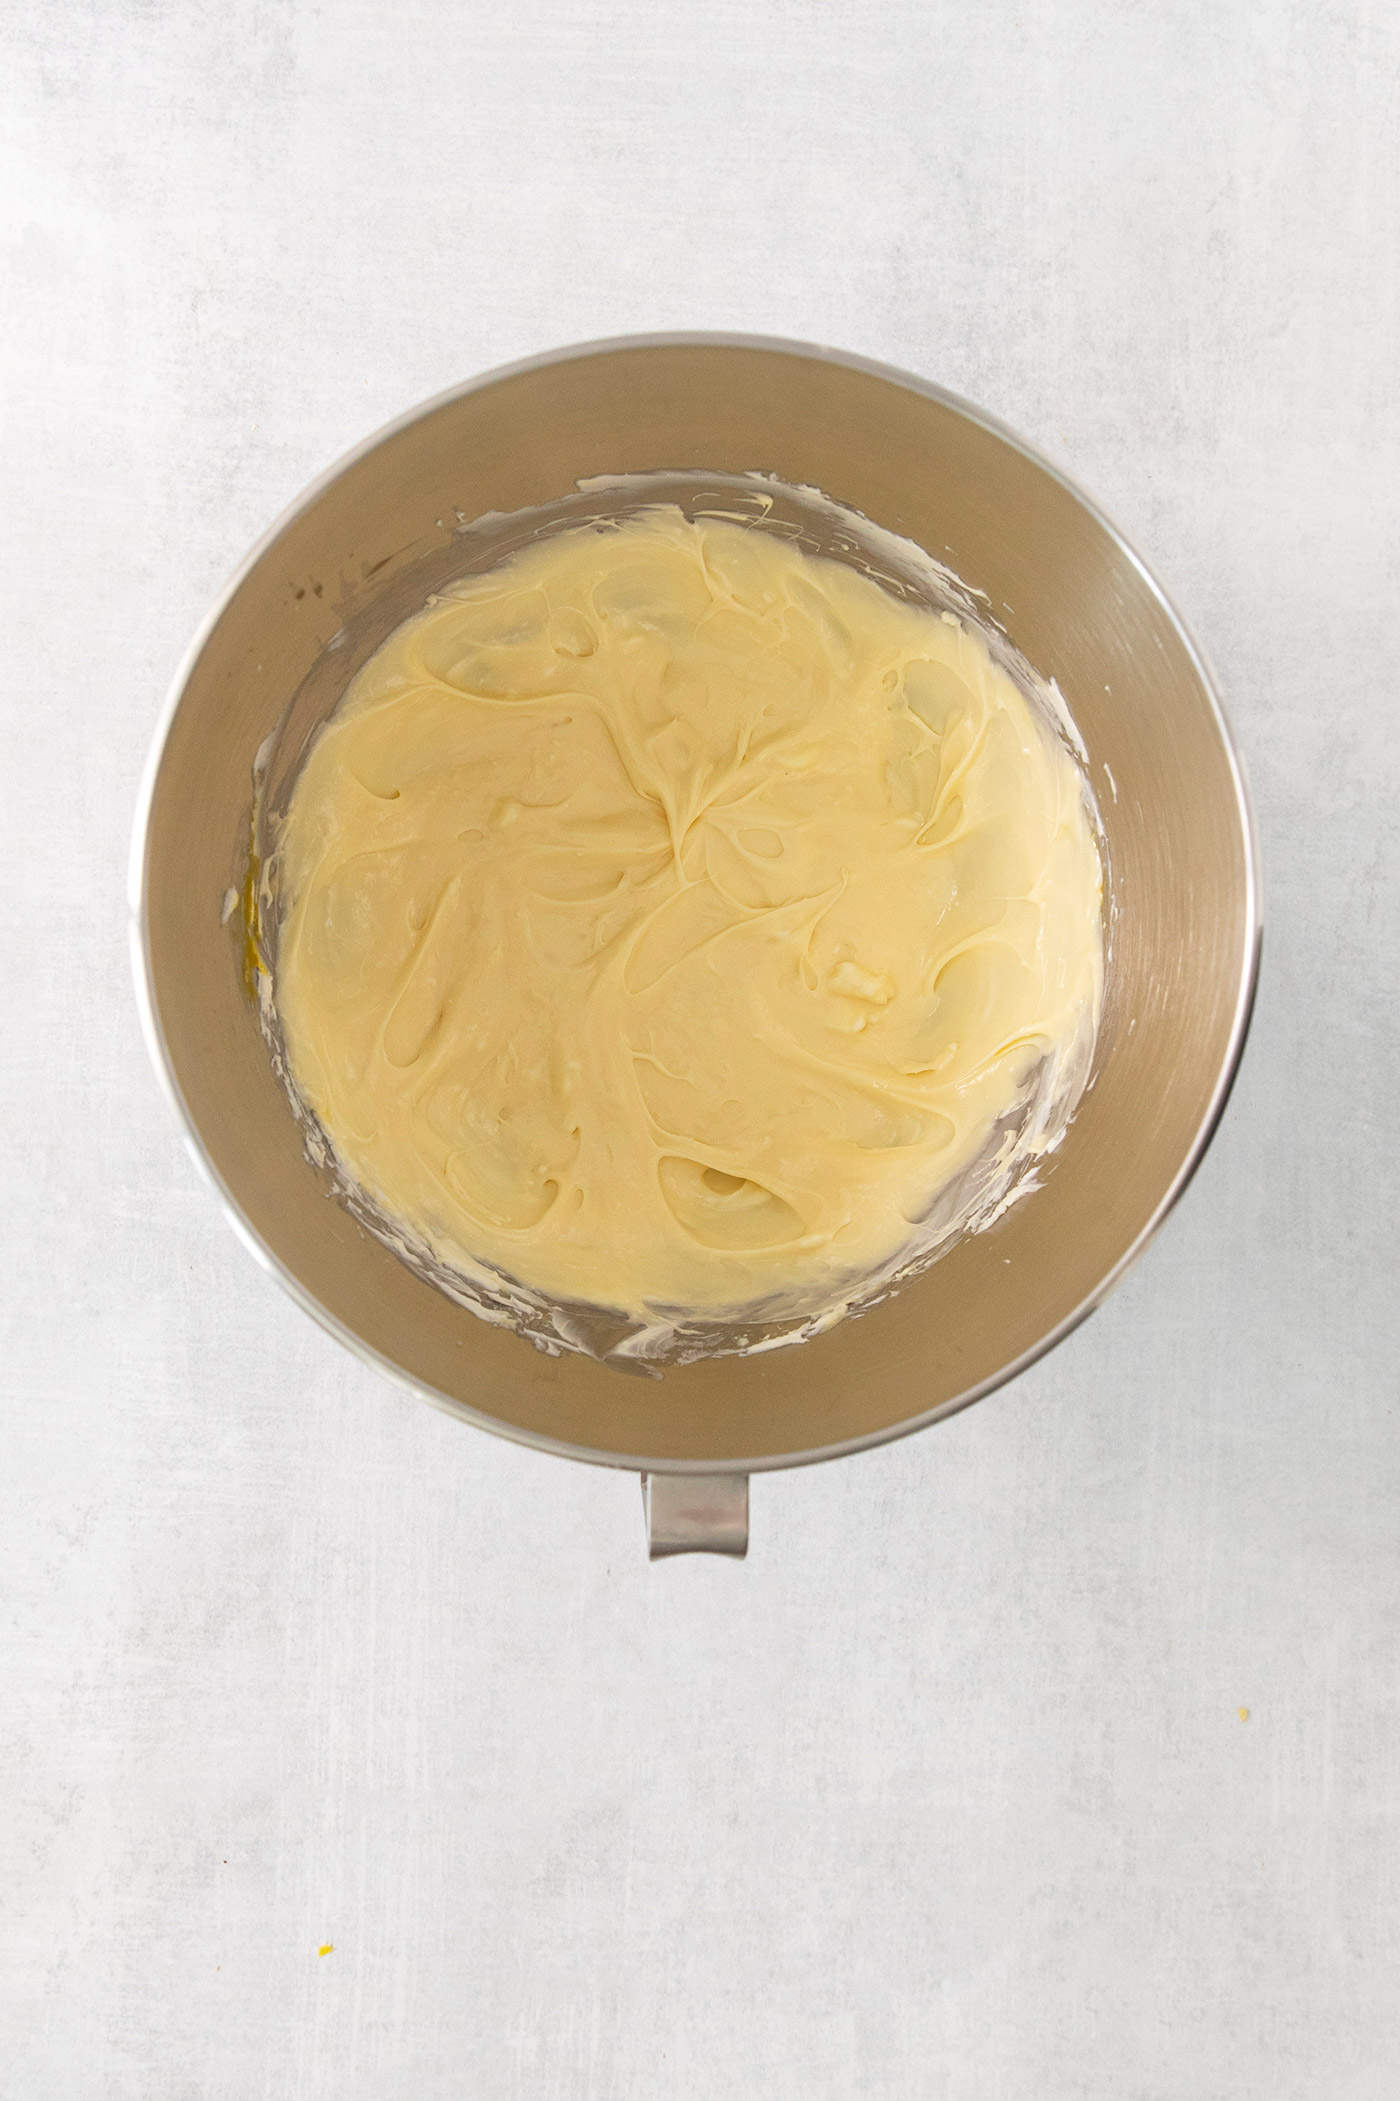 A mixing bowl is shown full of cheesecake filling.